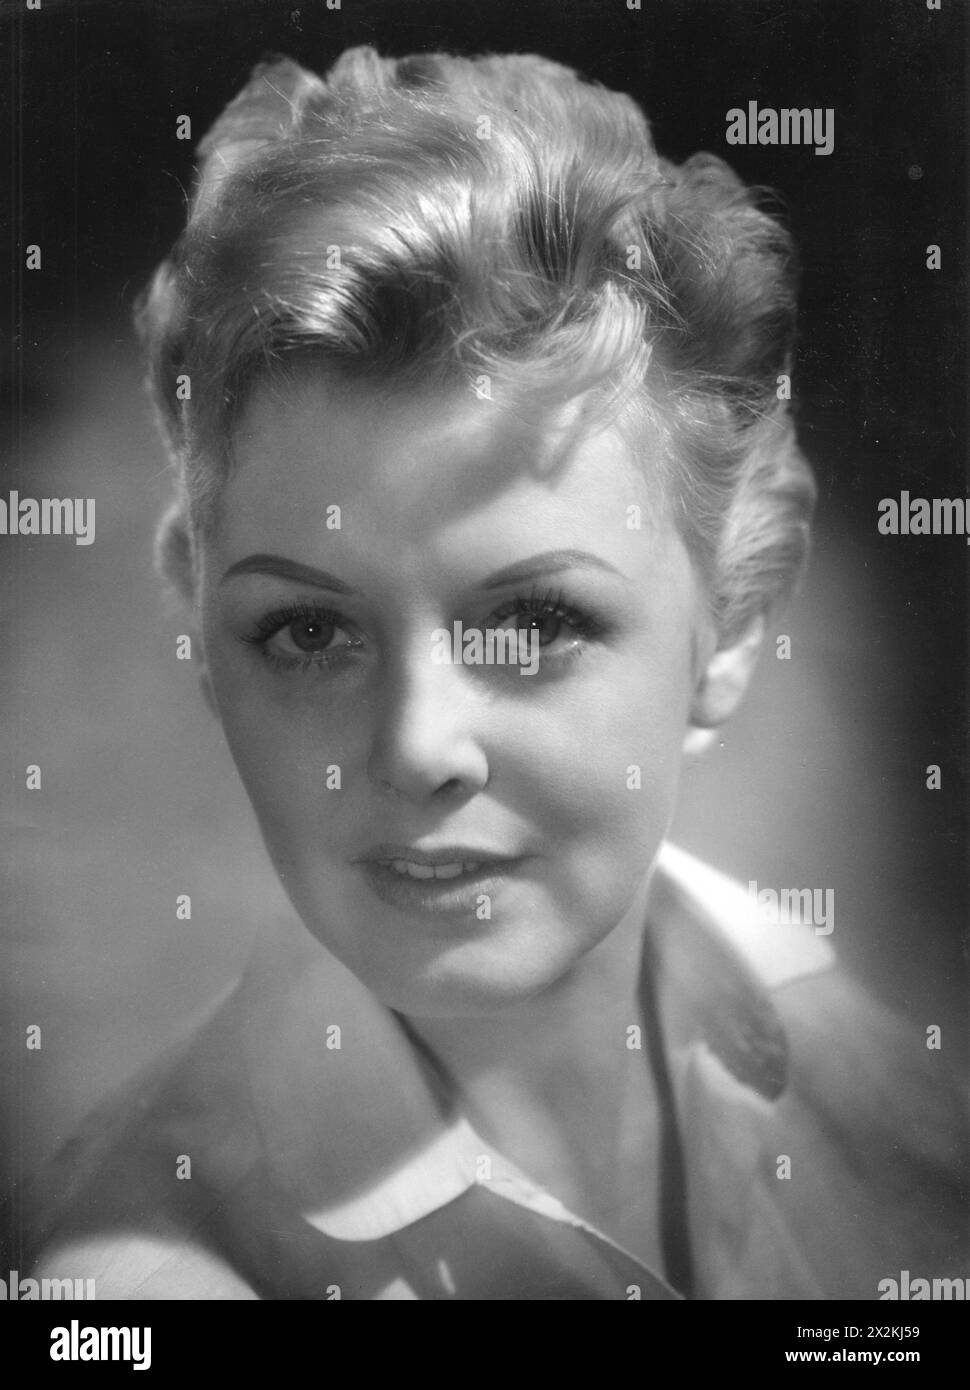 Schaack, Christel, 24.9.1925 - 15.10.2021, German model and beauty queen, 1955, ADDITIONAL-RIGHTS-CLEARANCE-INFO-NOT-AVAILABLE Stock Photo